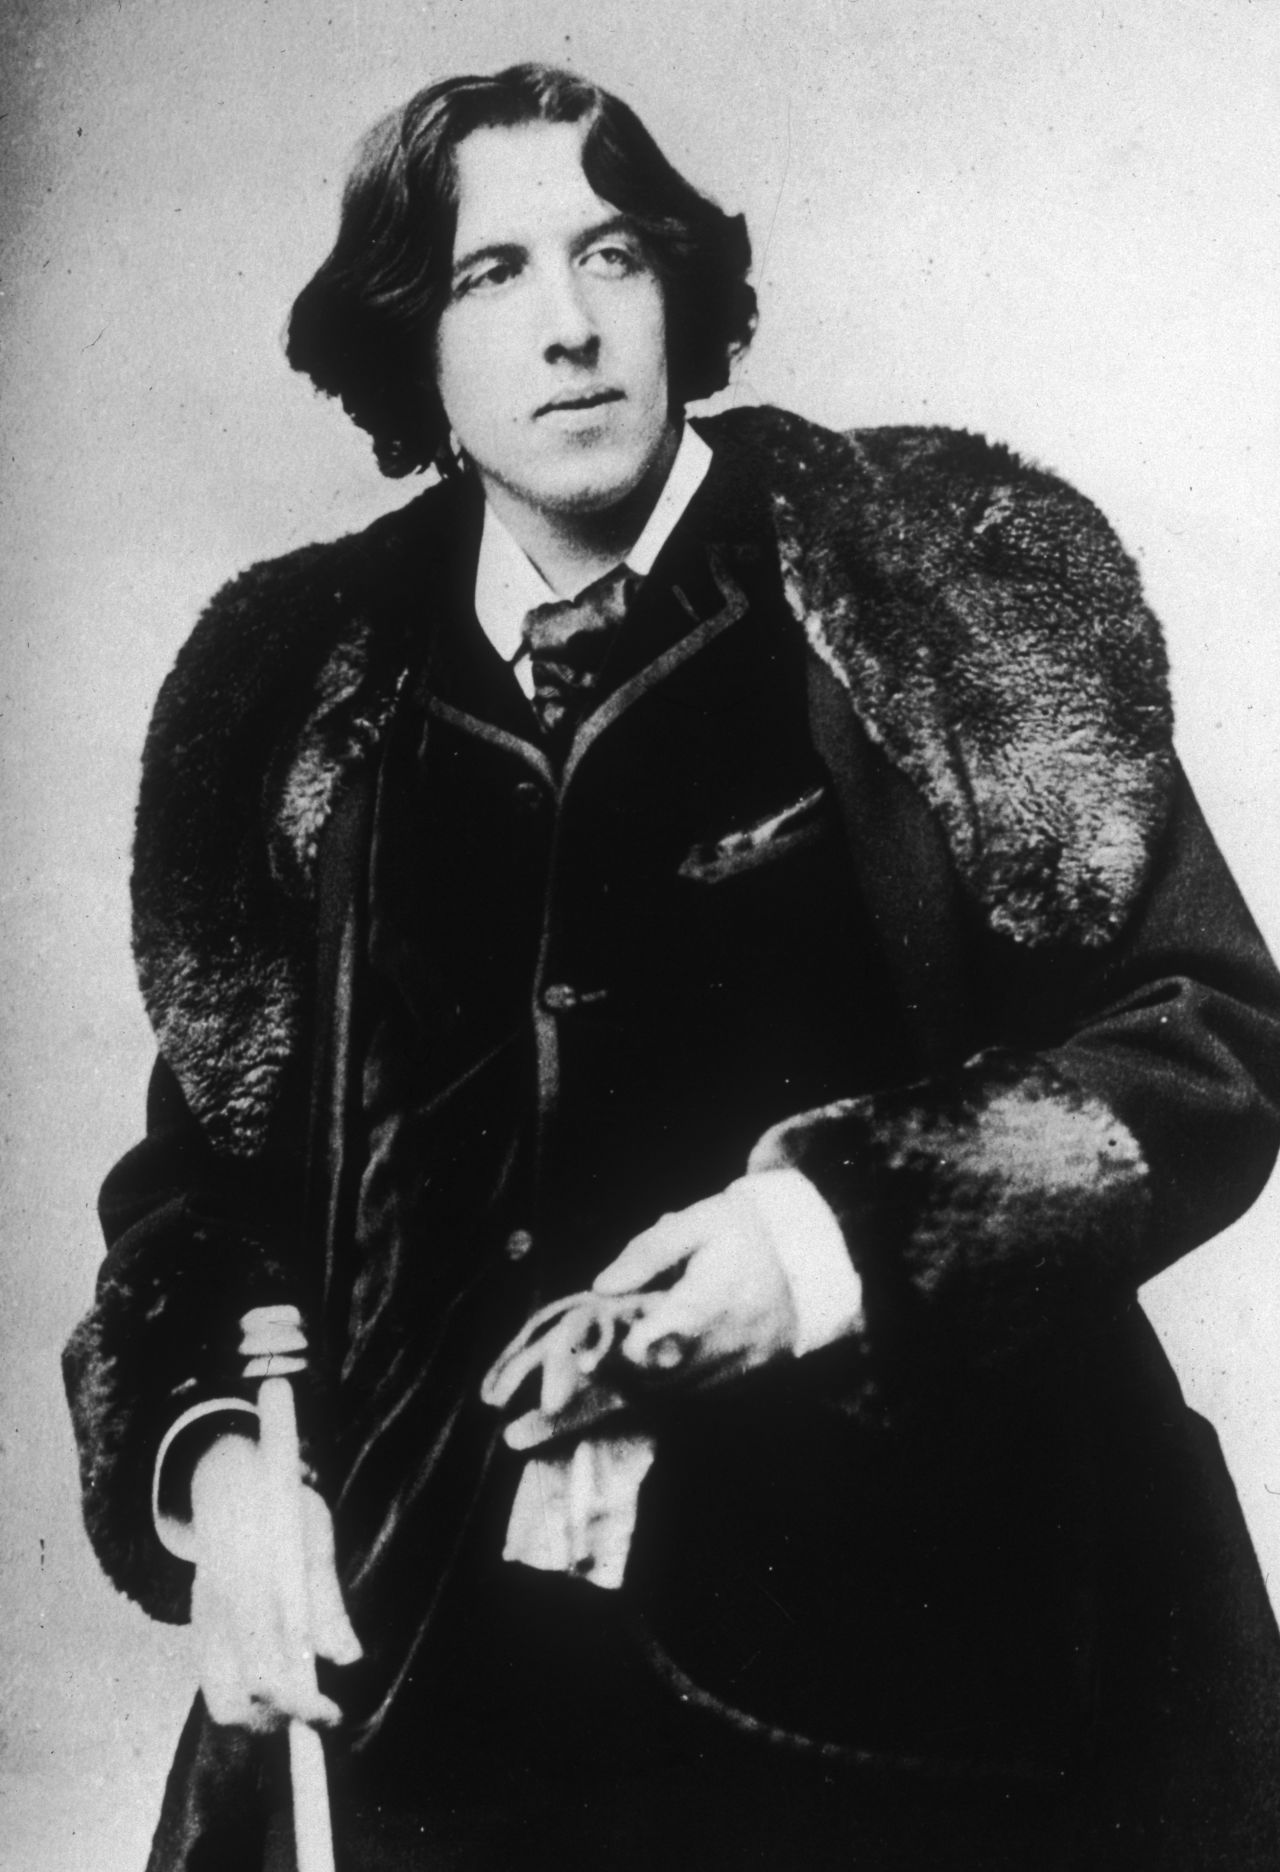 Irish-born author Oscar Wilde was buried in a pauper's grave when he died, bankrupt, in Paris in 1900. His body was later moved to Pere Lachaise, and his tomb marked with a memorial by sculptor Jacob Epstein.